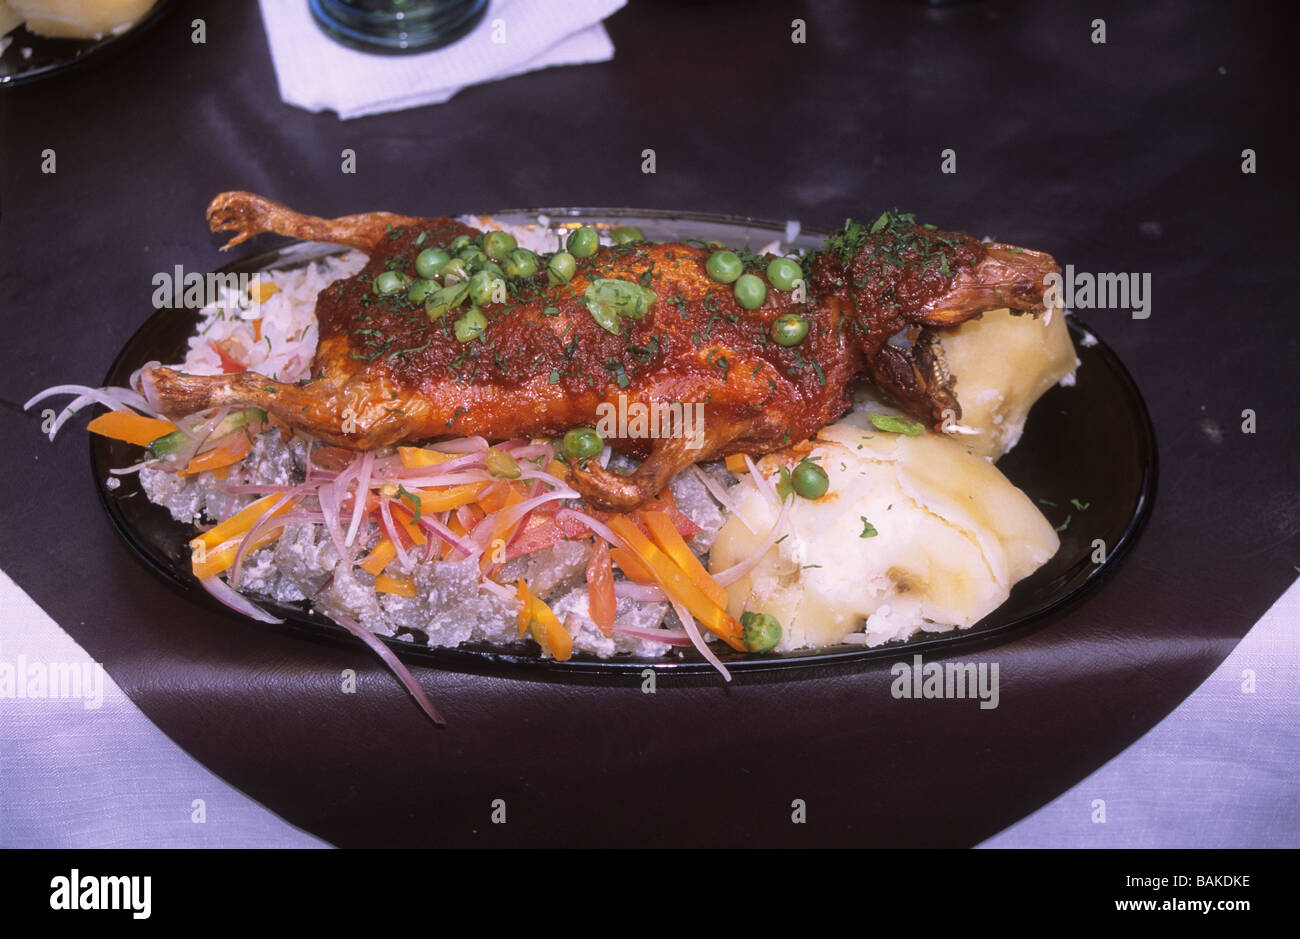 Cuy or guinea pig, a popular dish in Peru and also Ecuador and Quechua speaking parts of Bolivia. Here served with rice, potatoes and salad. Stock Photo